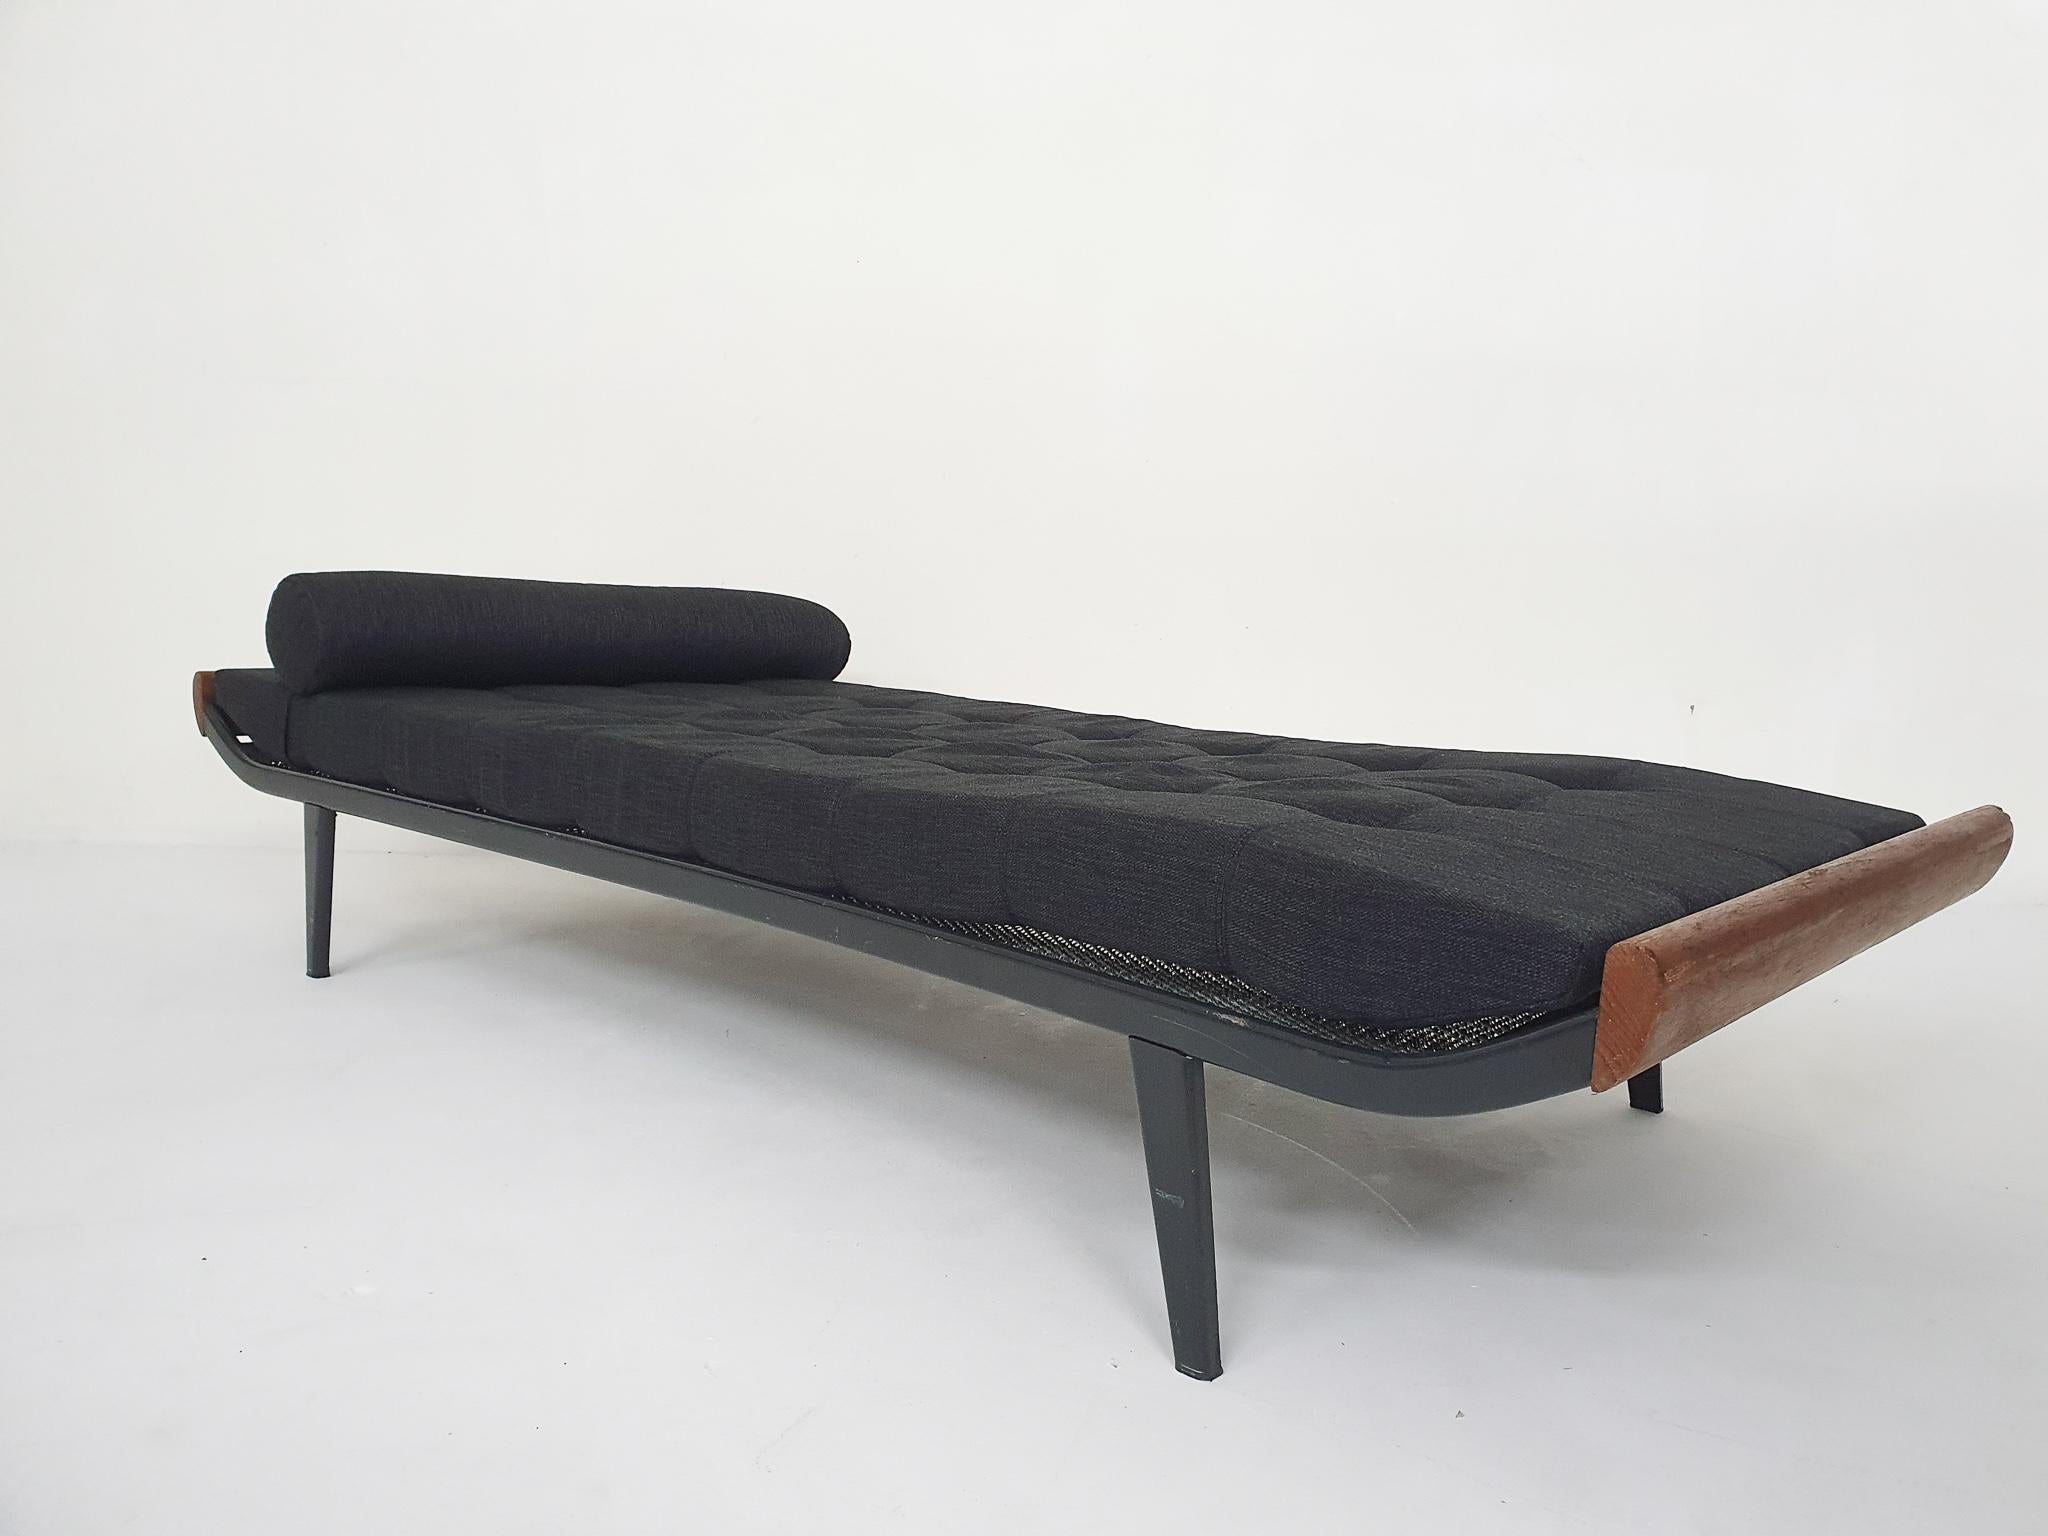 Mid-20th Century Black A.R. Cordemeyer for Auping “Cleopatra” Daybed, the Netherlands, 1953